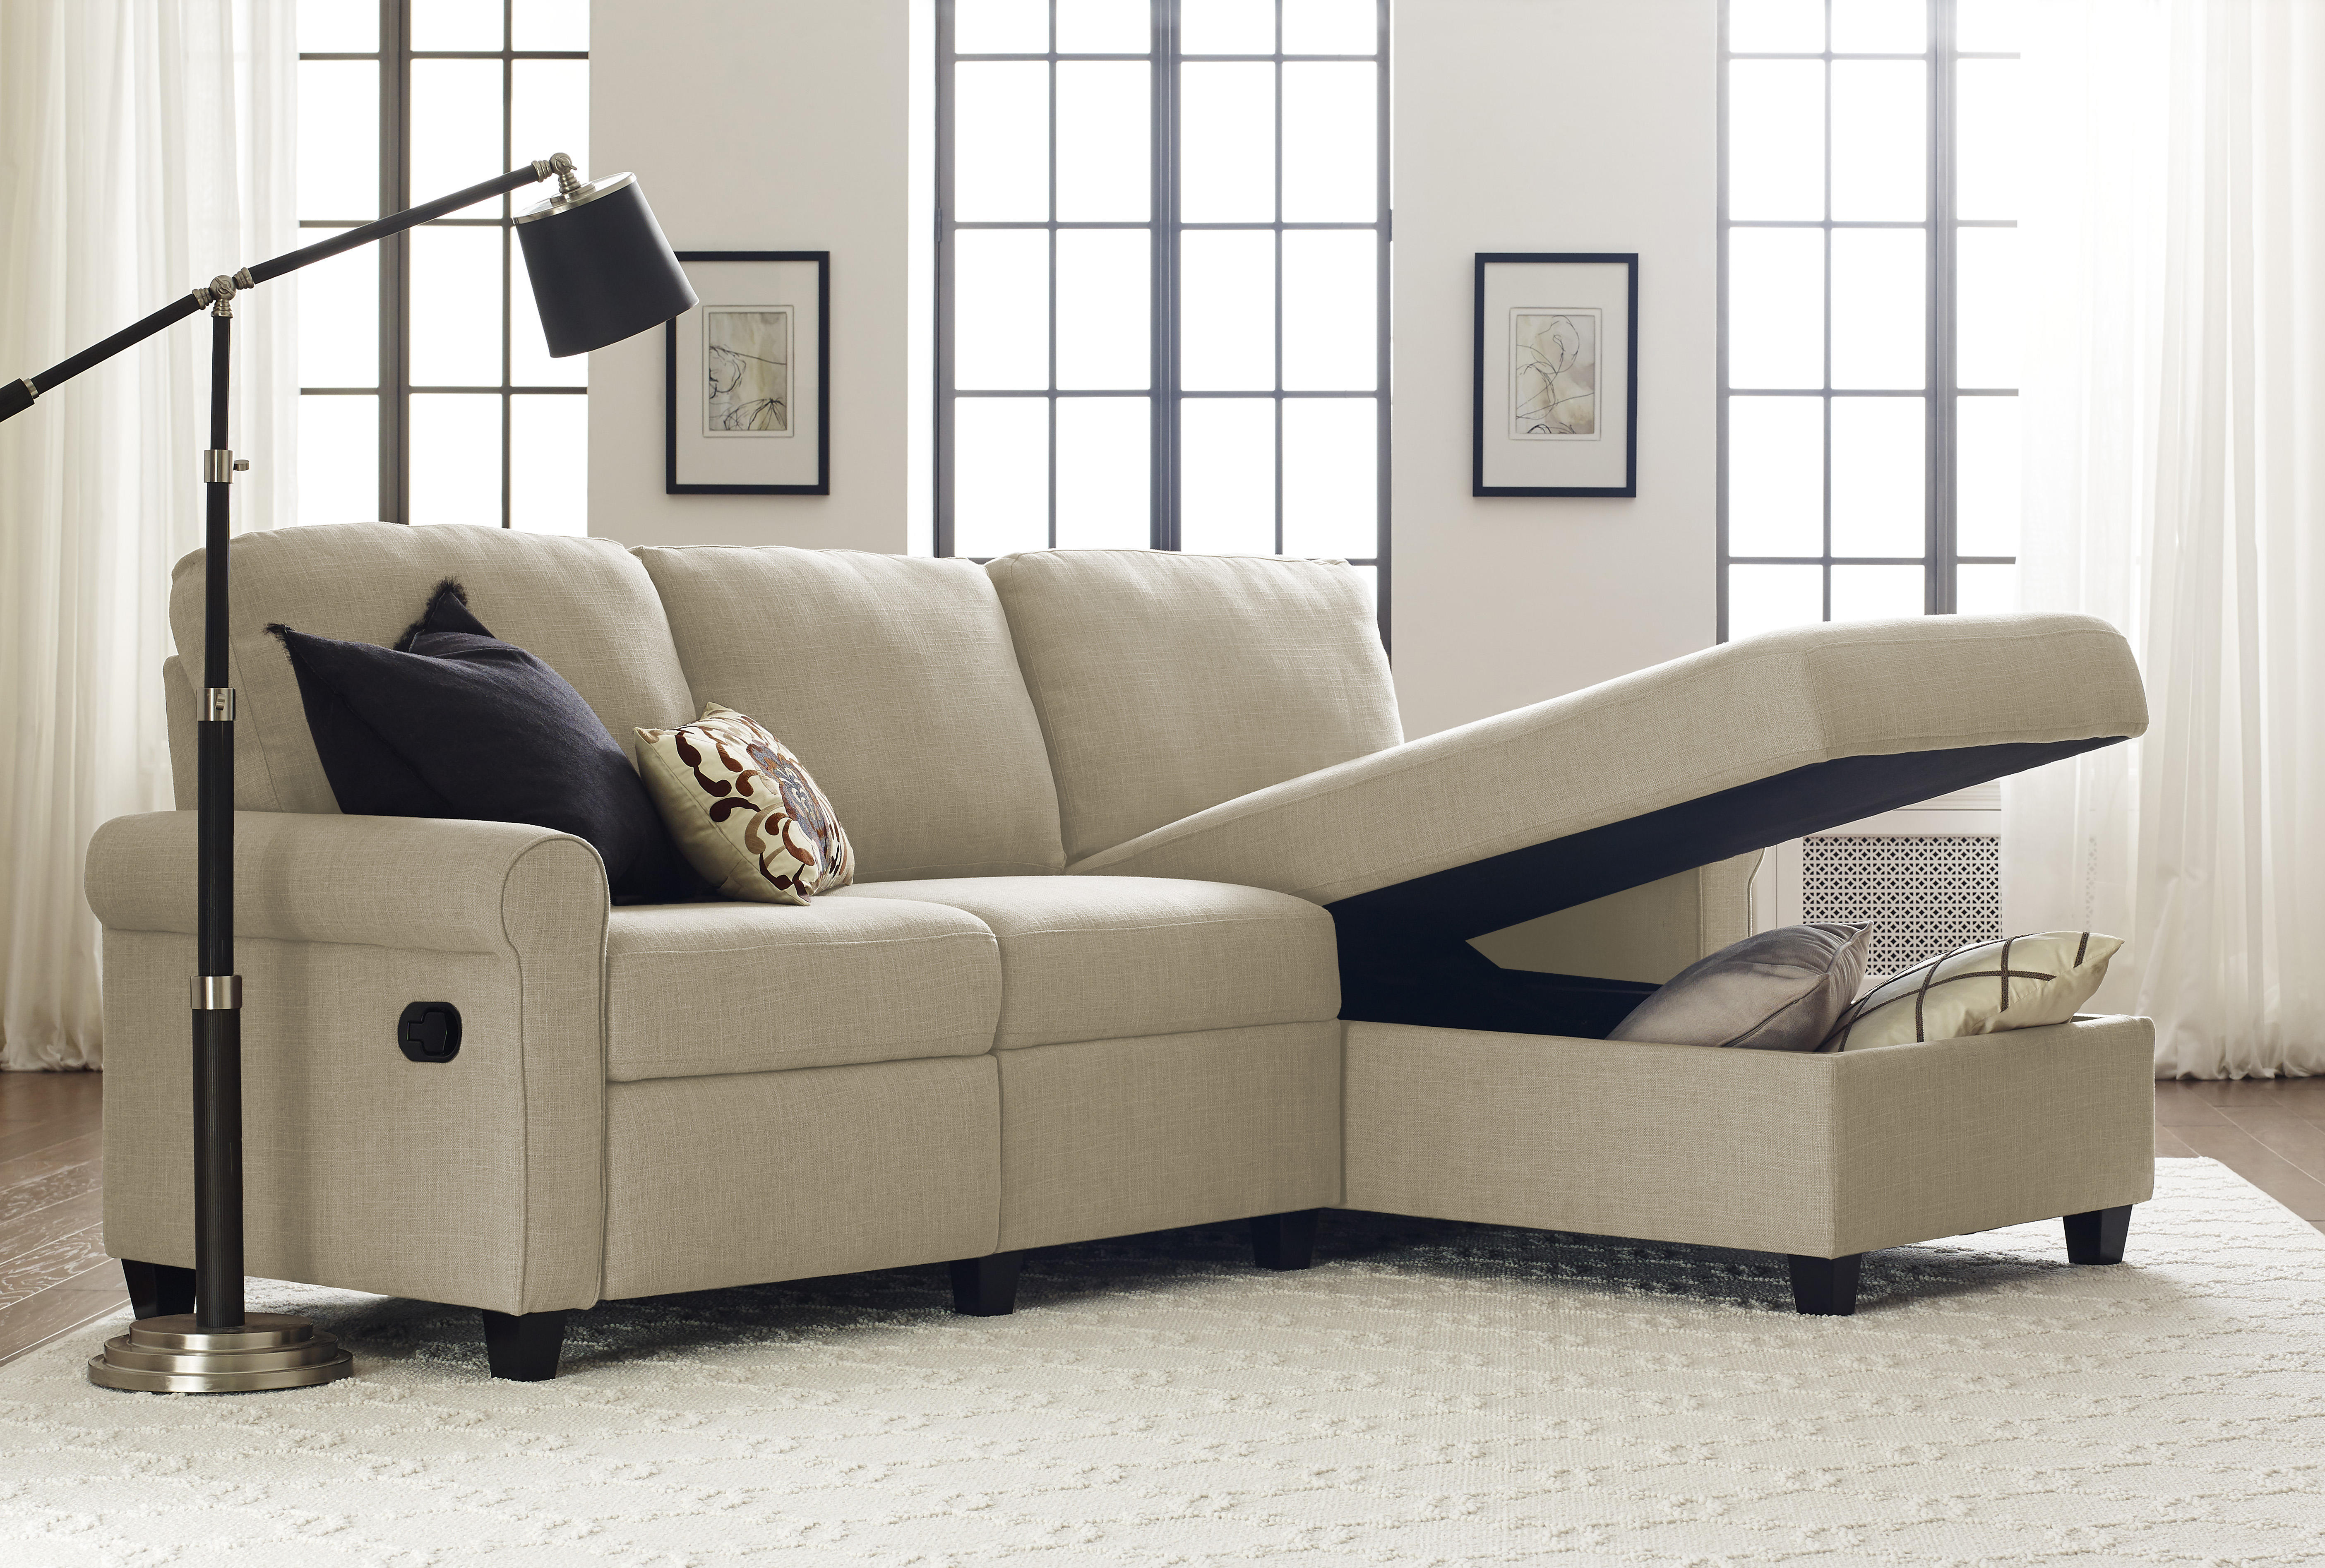 Serta Copenhagen Reclining Sectional with Right Storage Chaise - Oatmeal - image 2 of 9